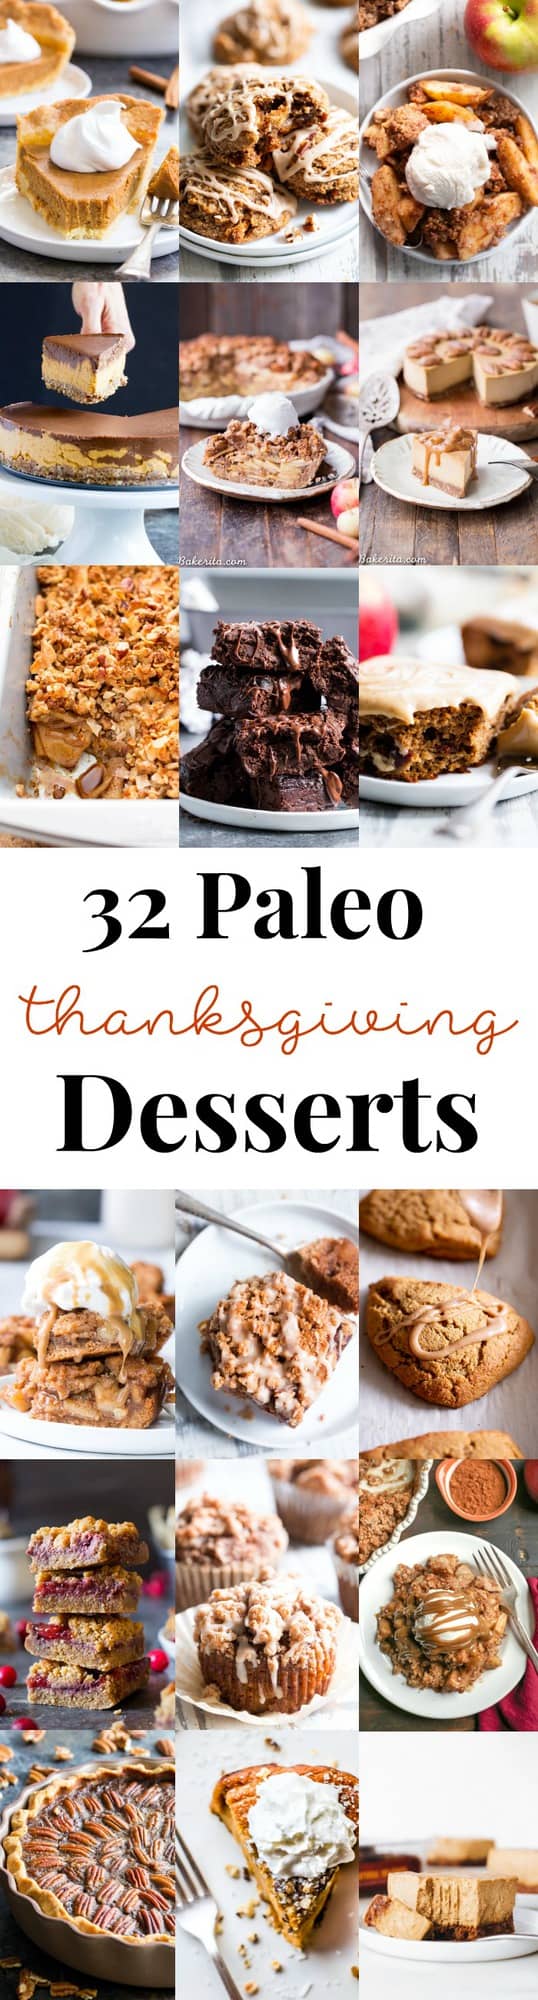 These 32 Paleo Thanksgiving Desserts are all you need to make everyone at the table happy!  From pies, to cakes and cookies, to dairy-free "cheesecakes" these desserts are gluten-free, dairy-free, refined sugar free and totally decadent, dreamy, and delicious!  Perfect for Thanksgiving and the holidays.  